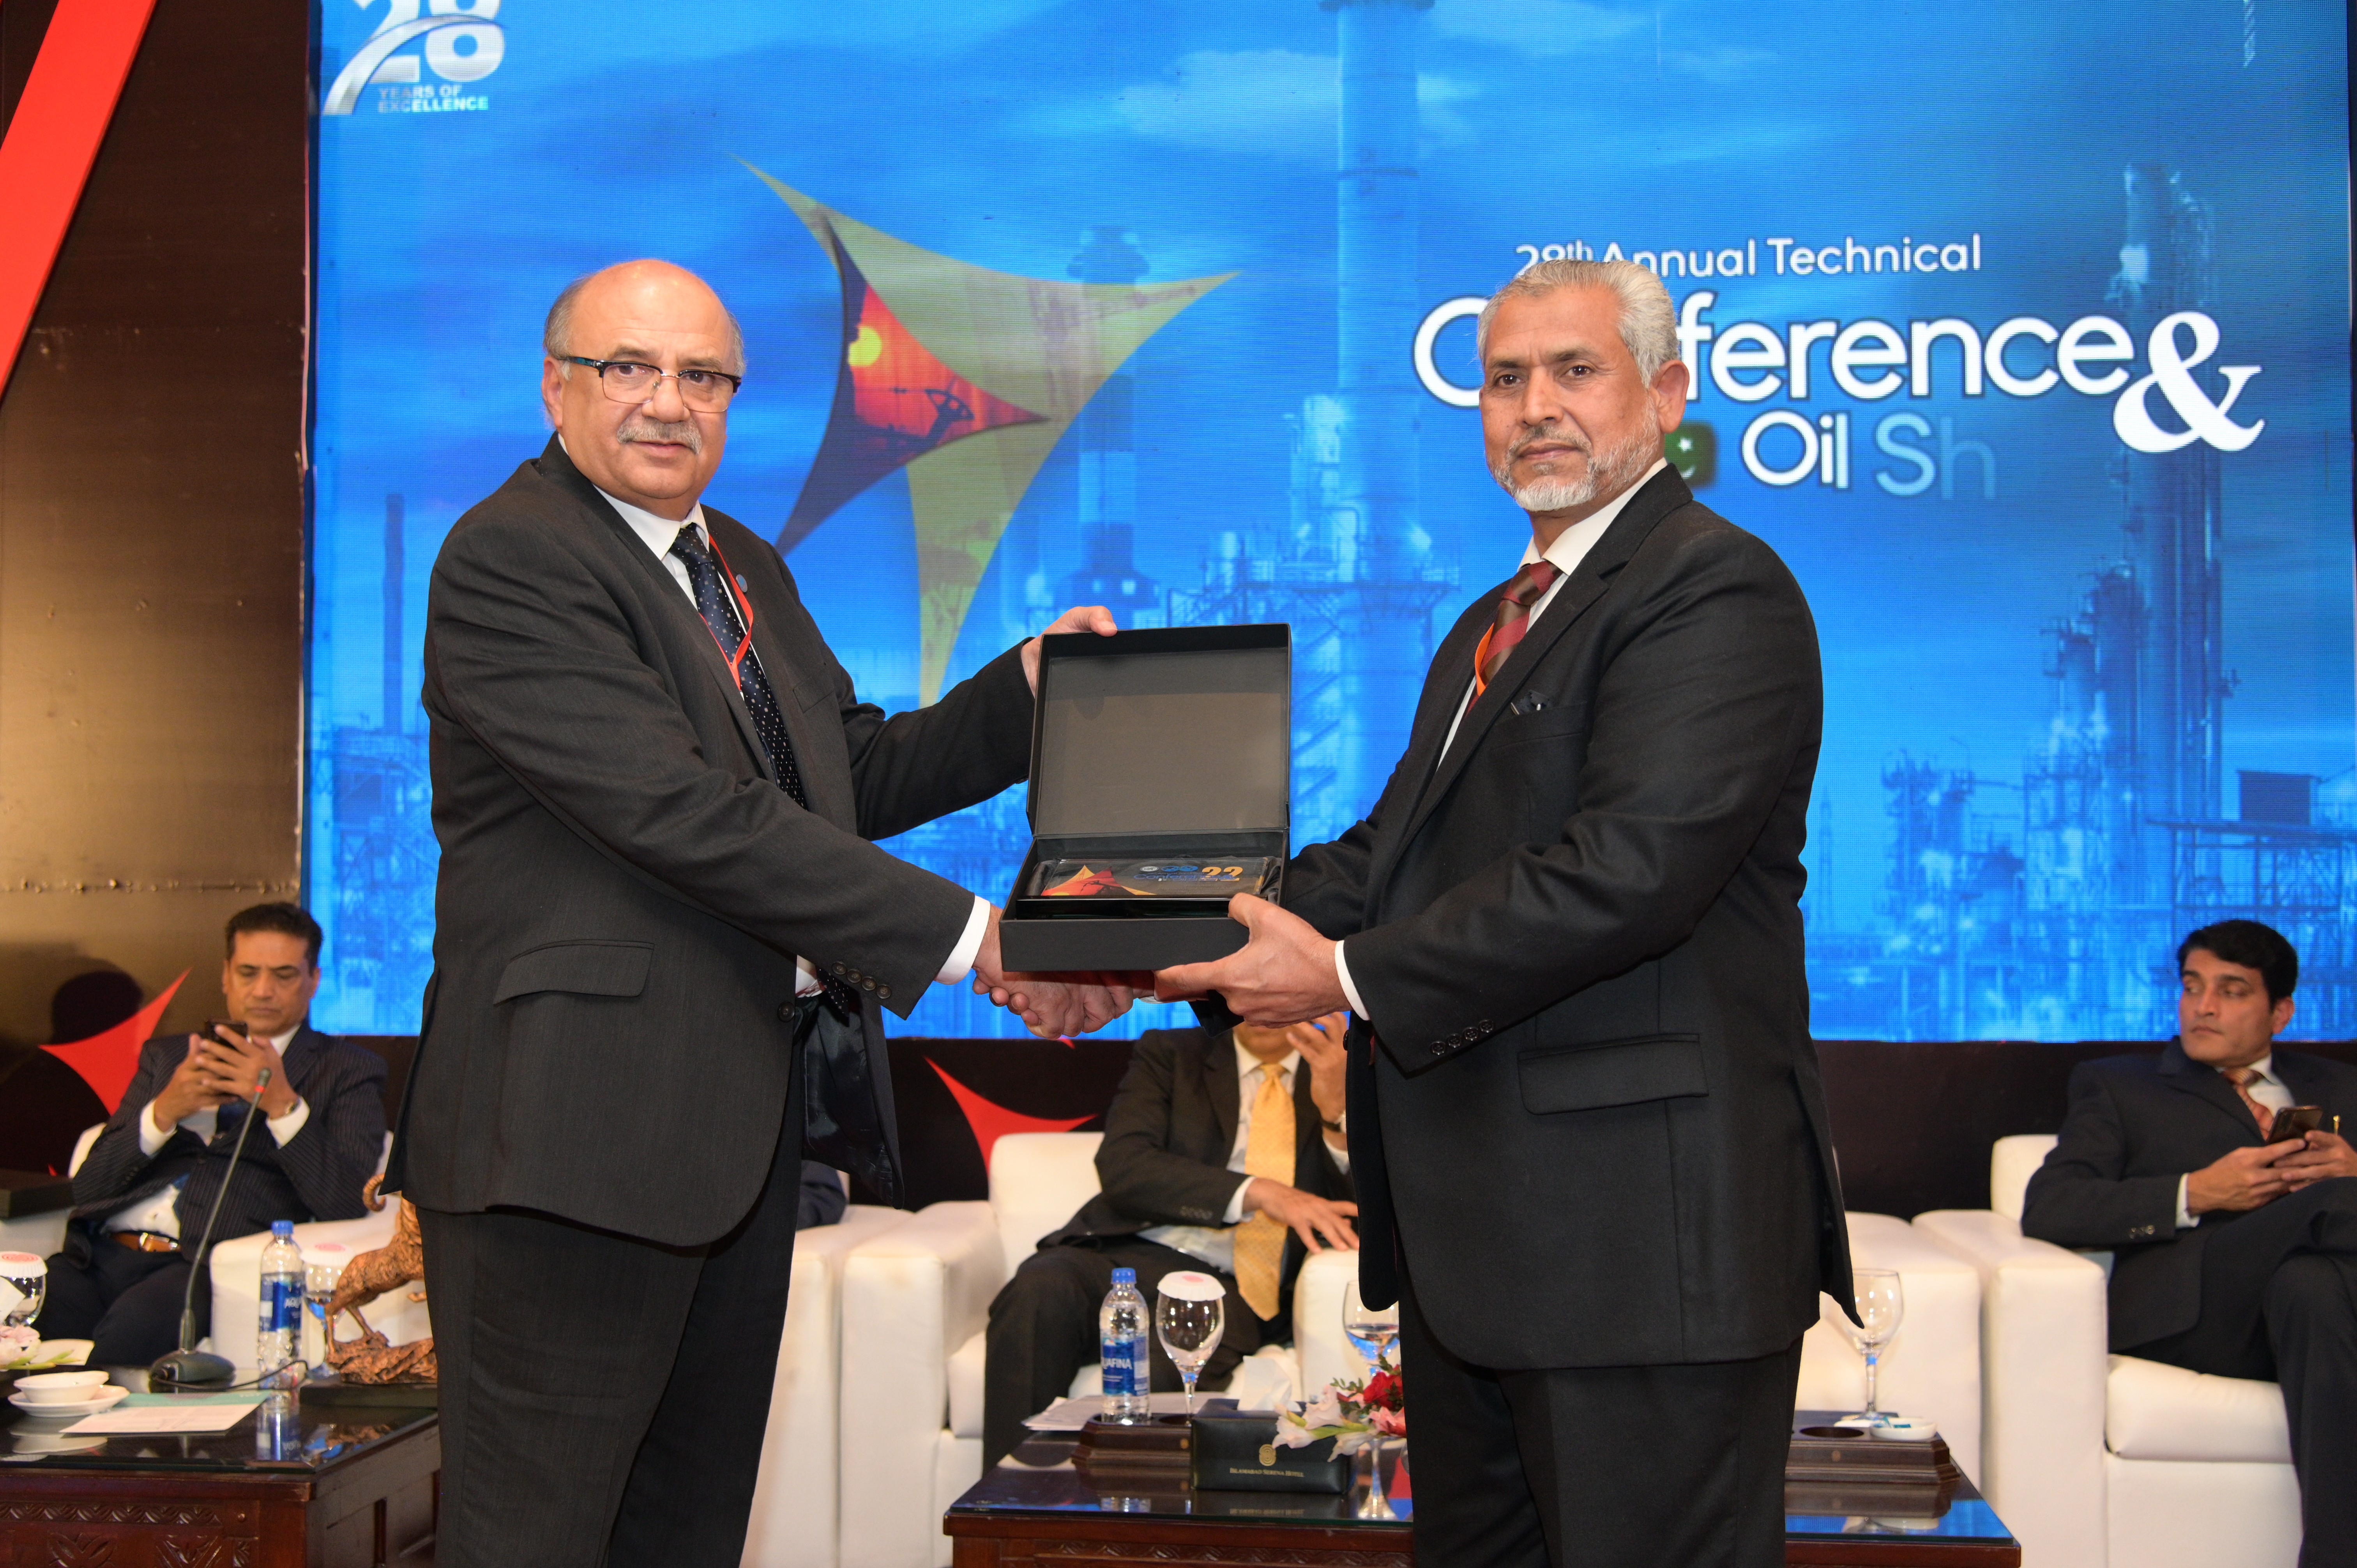 Shields distribution ceremony to the chief guest as a sign of appreciation at the conference